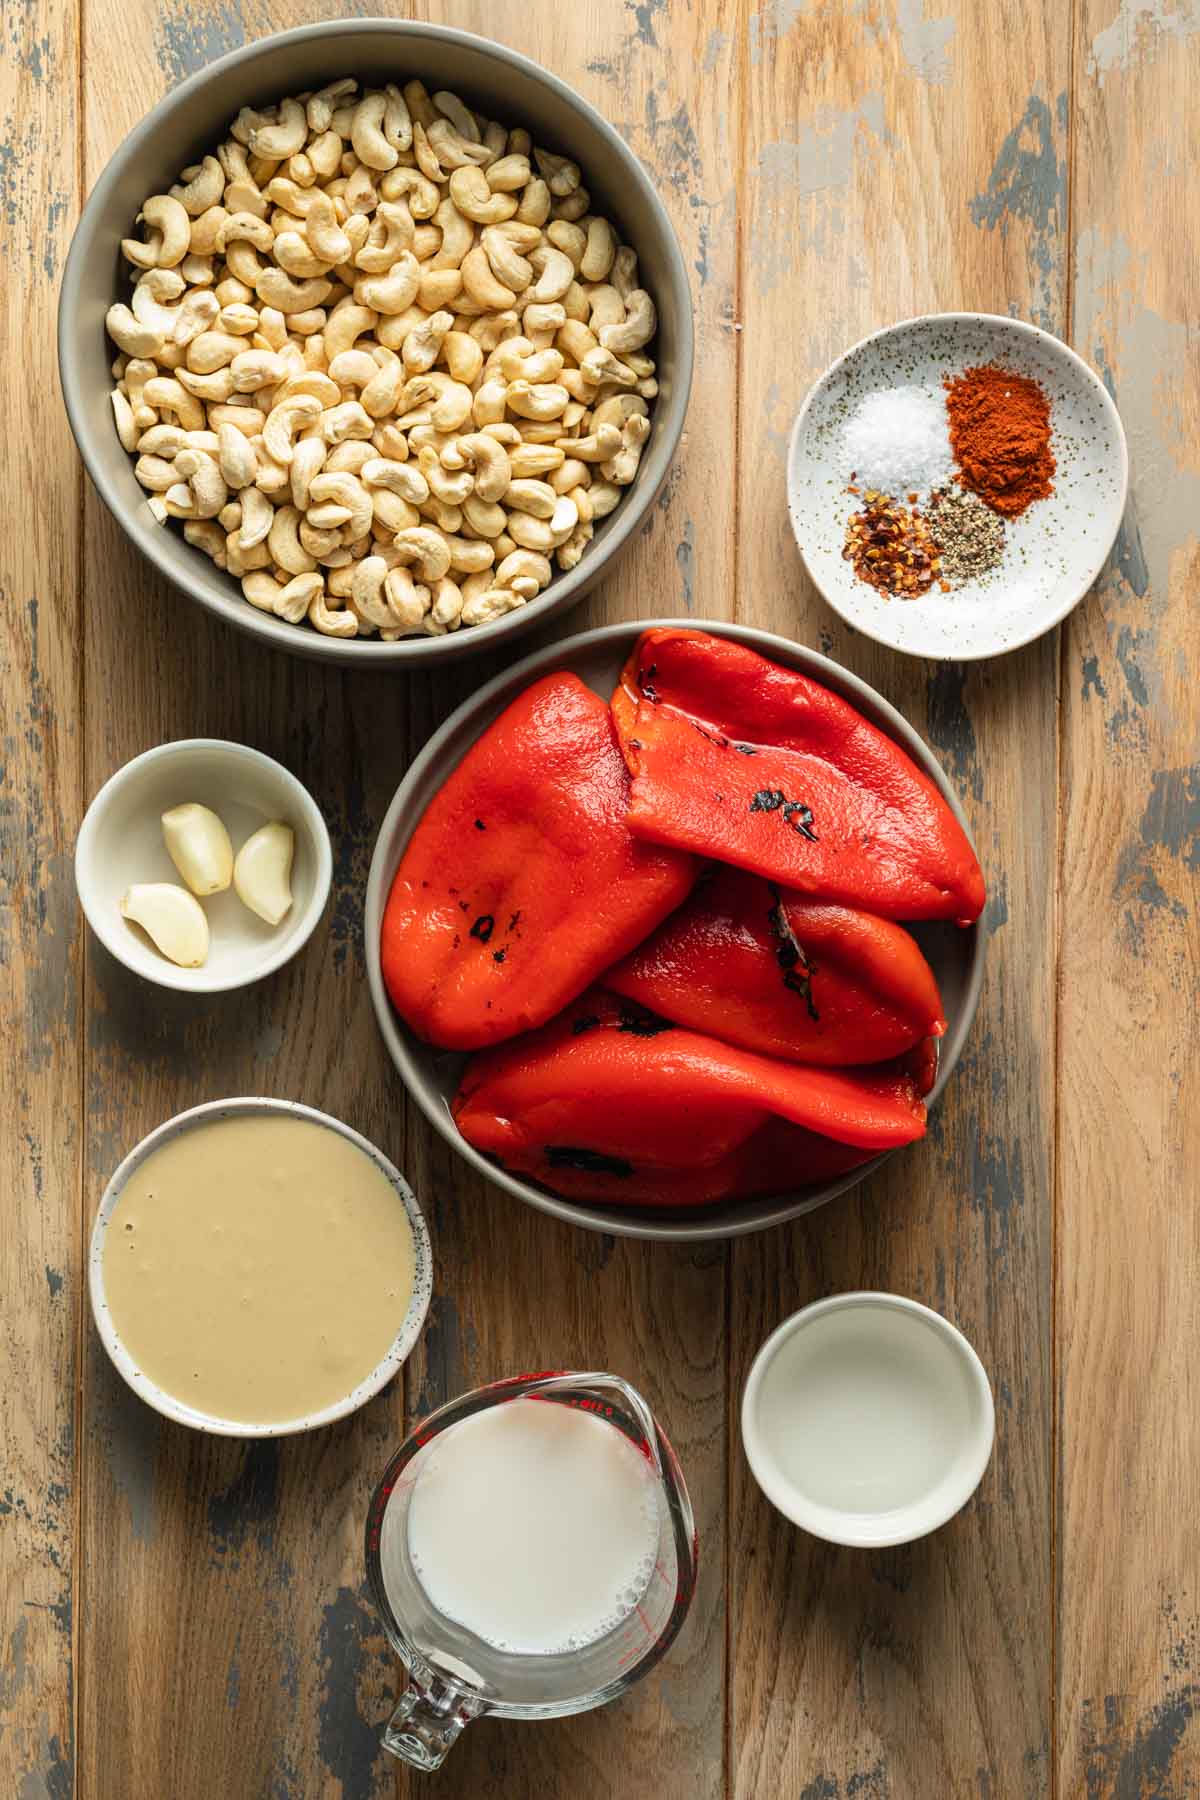 Ingredients to make roasted red pepper dip with cashews.